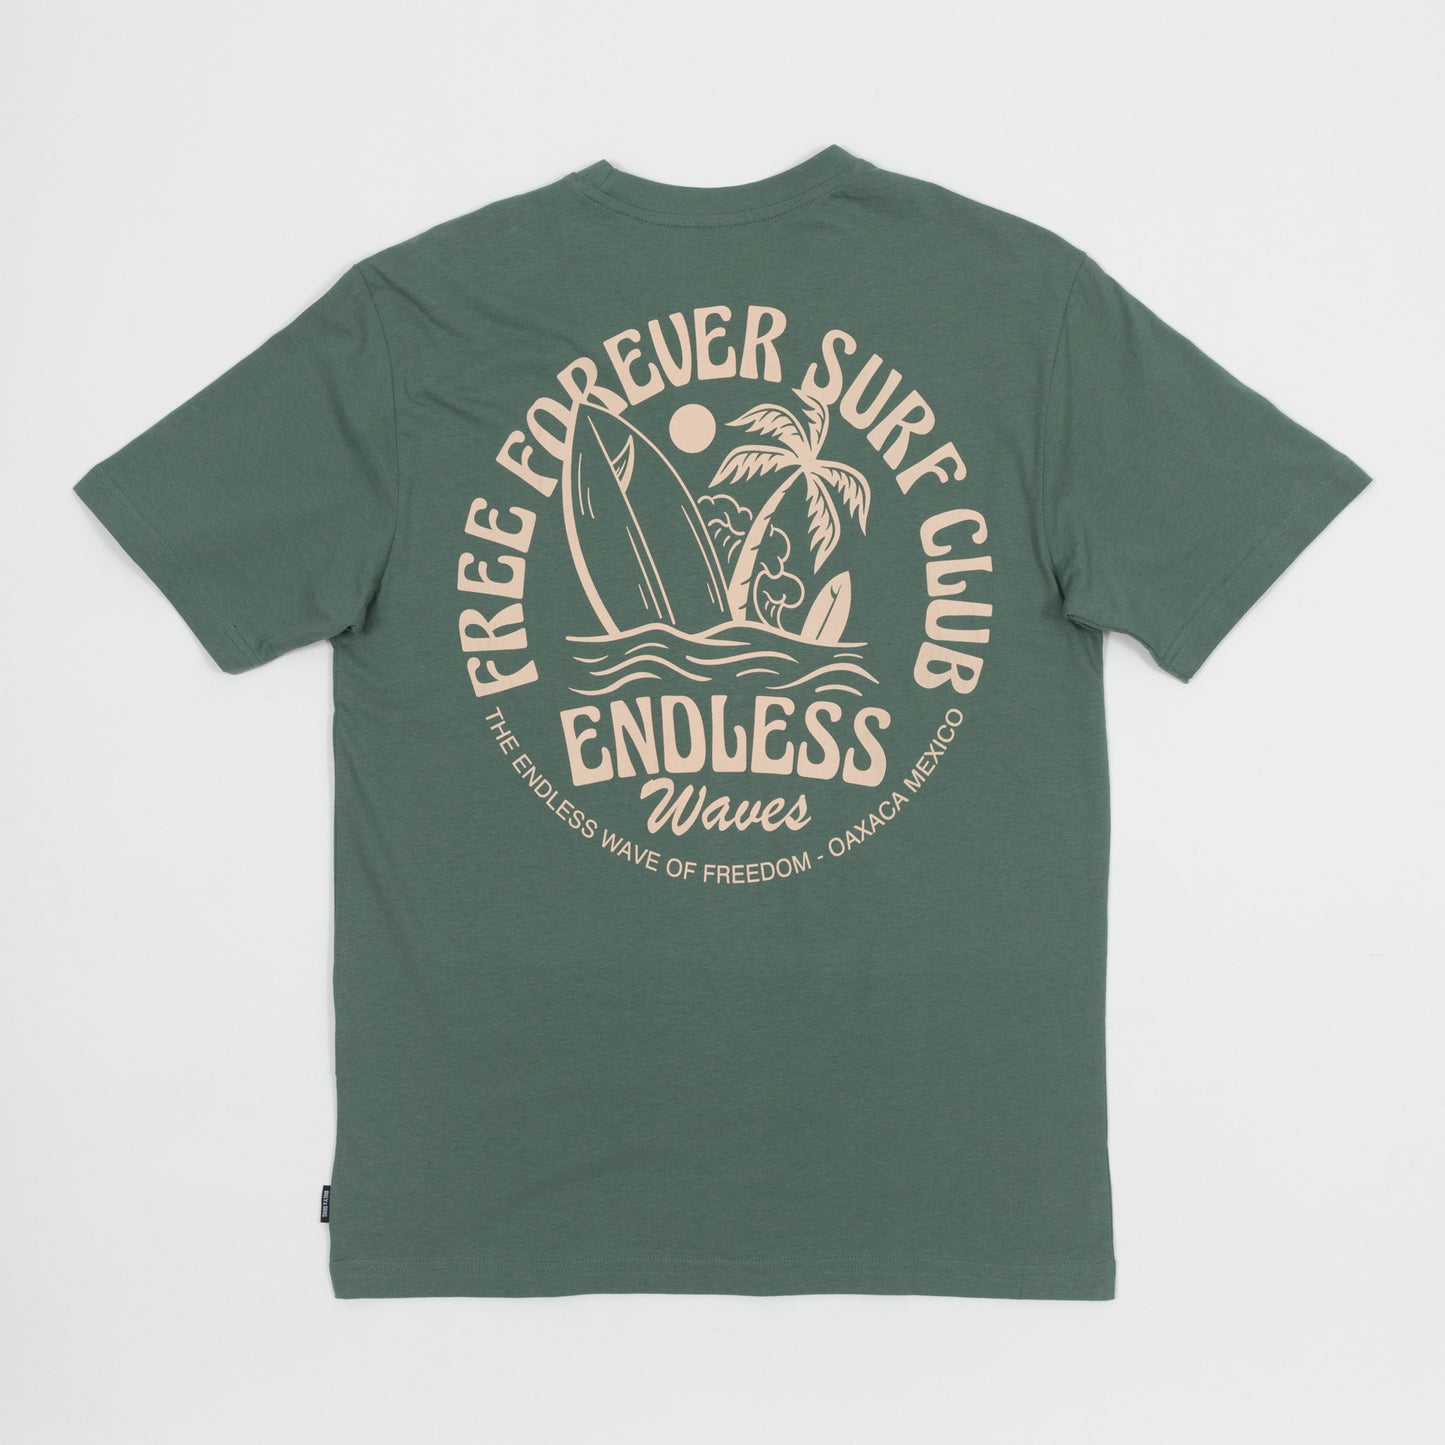 ONLY & SONS Surf Club T-Shirt in GREEN